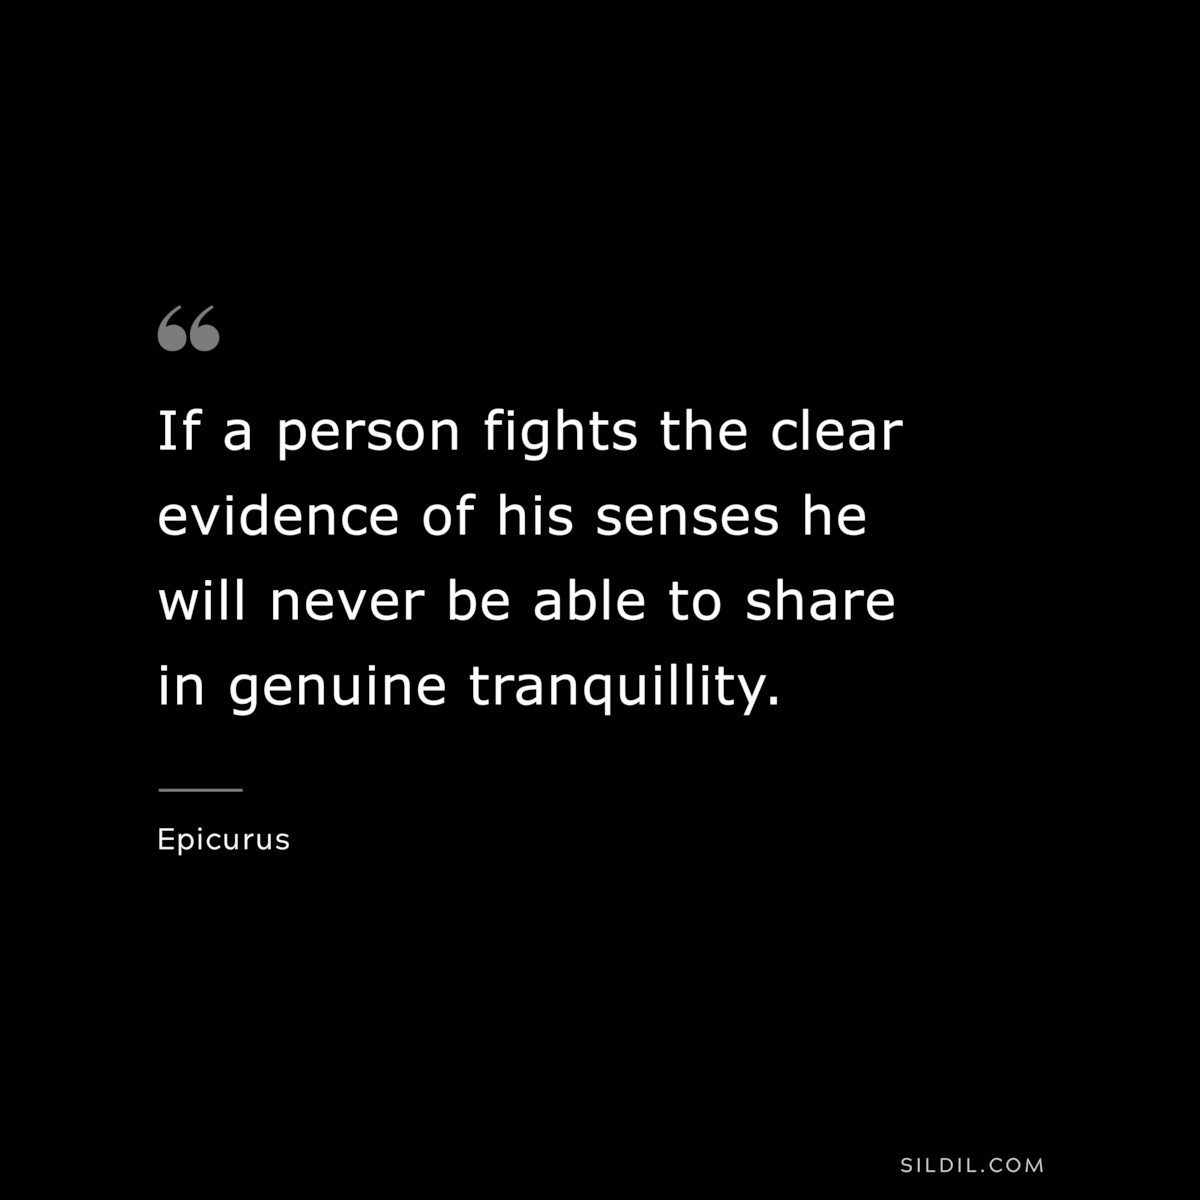 If a person fights the clear evidence of his senses he will never be able to share in genuine tranquillity. — Epicurus